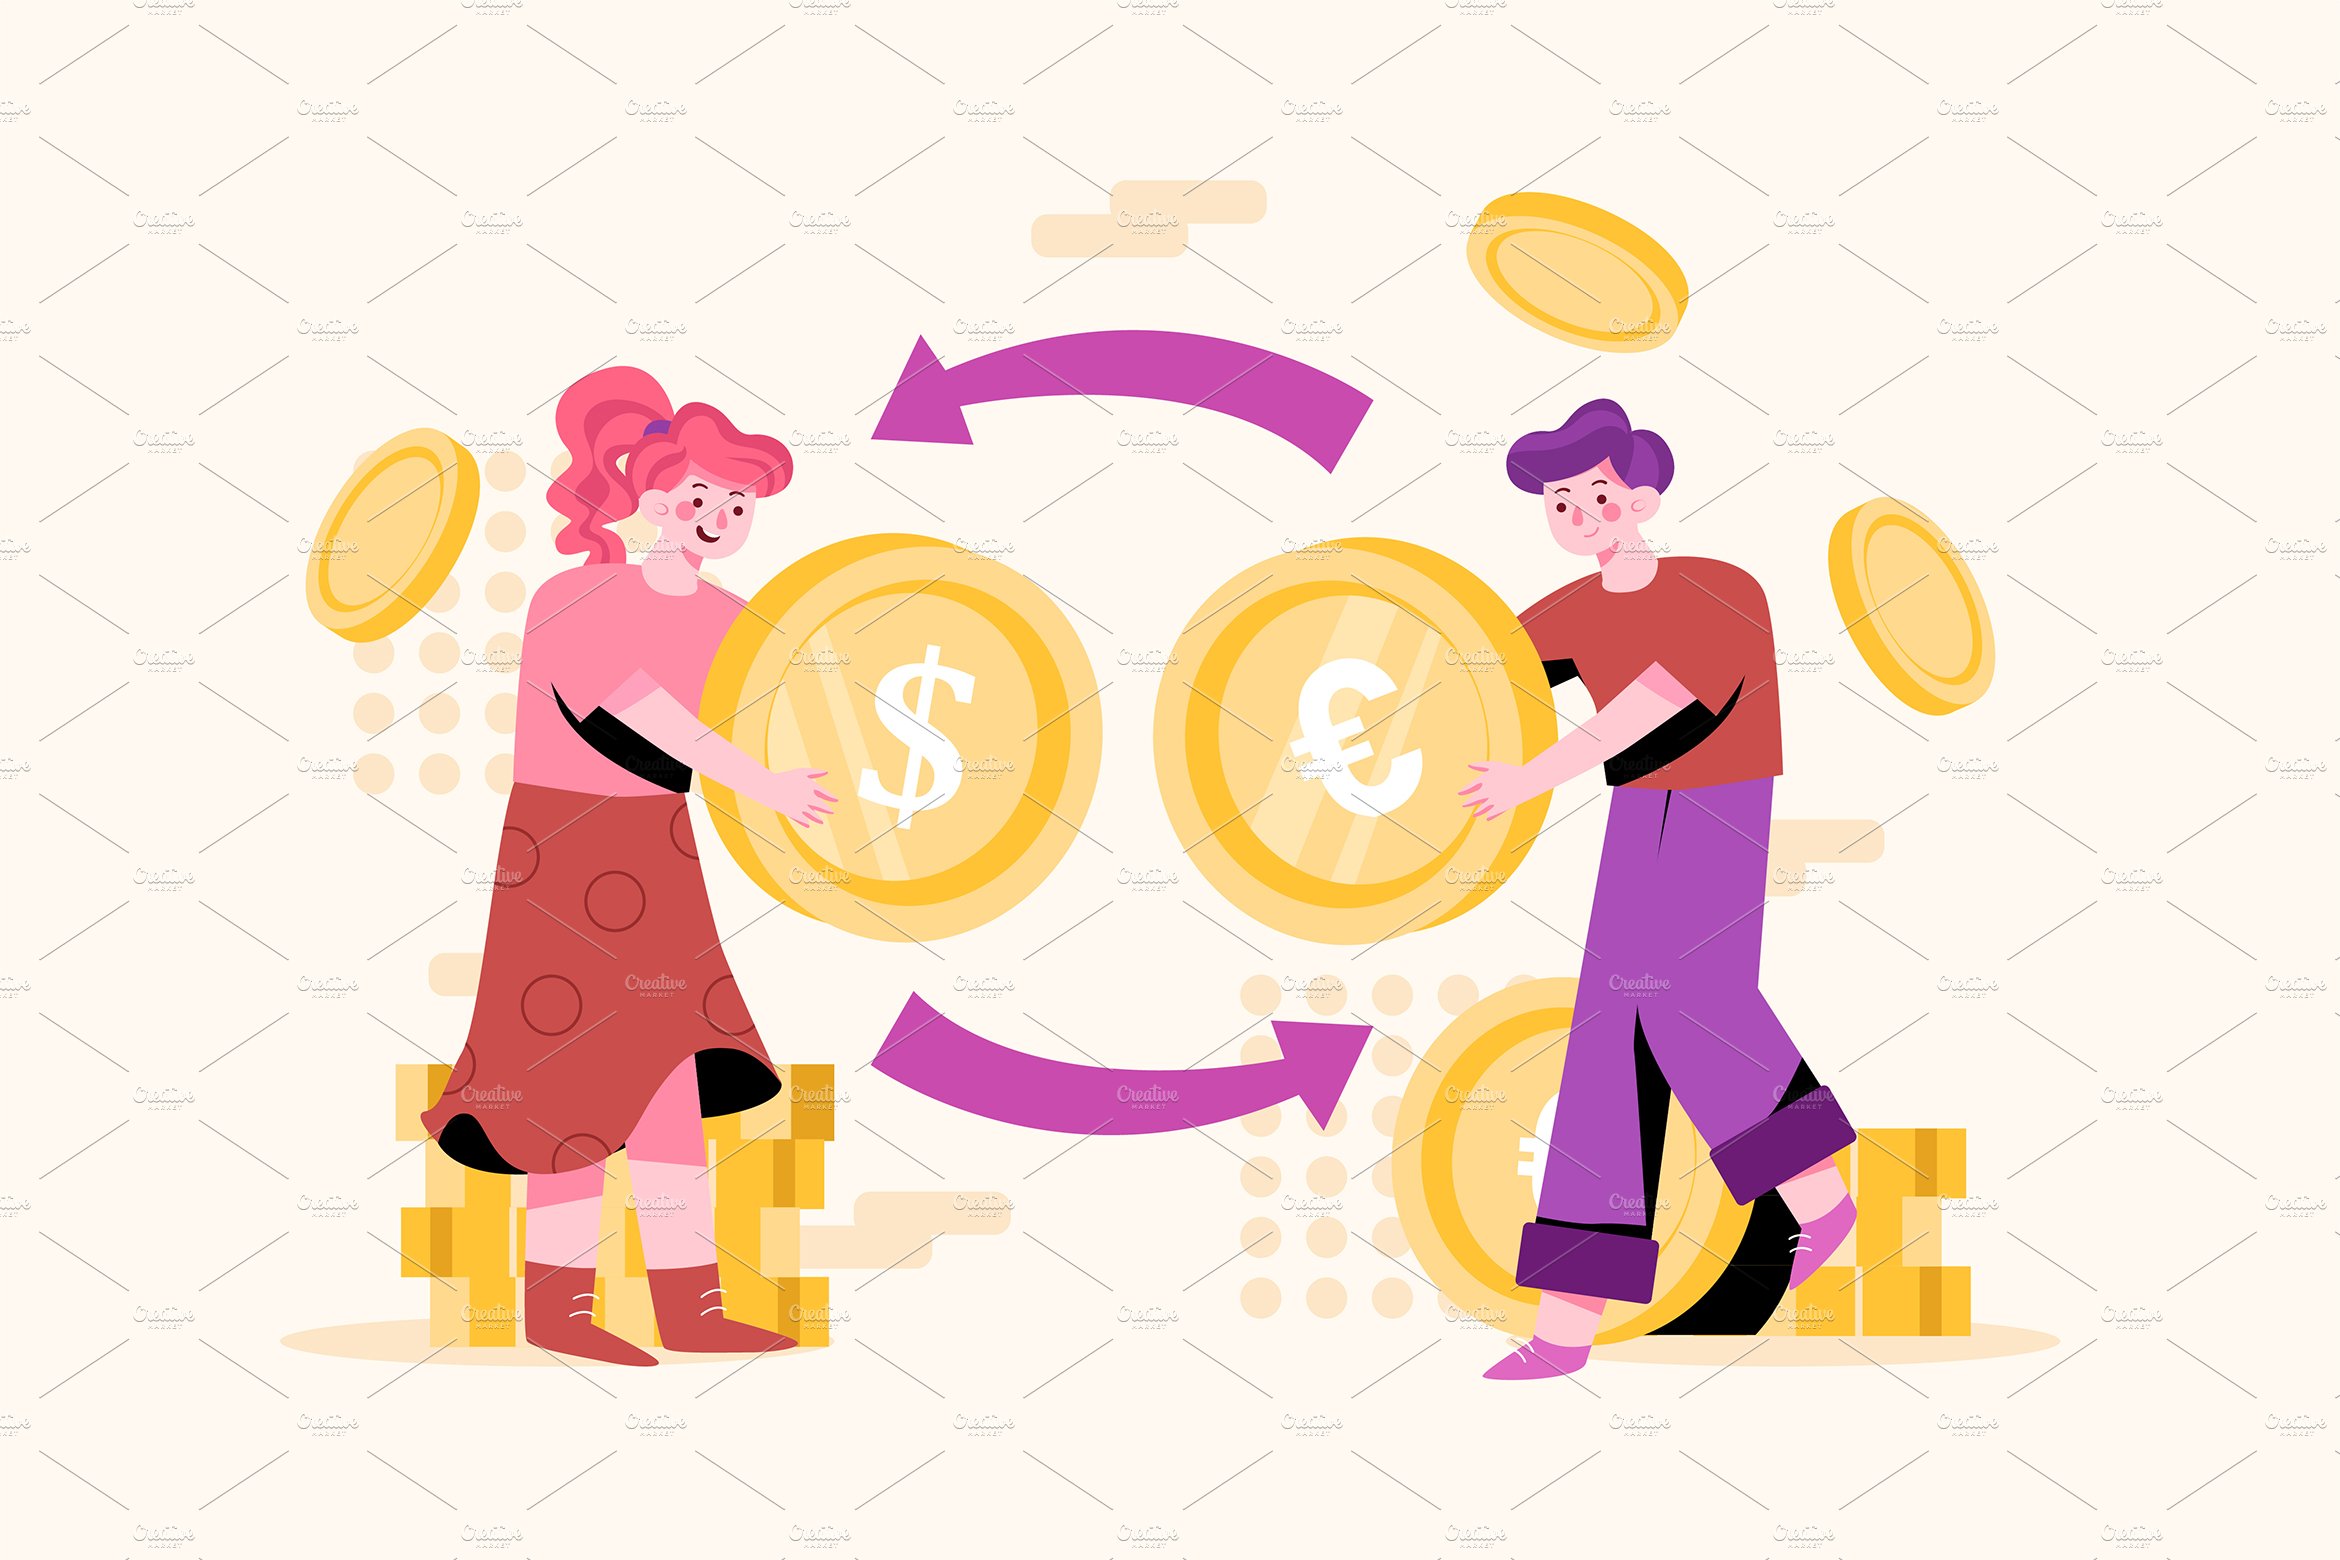 A man and woman shaking hands over a pile of money.